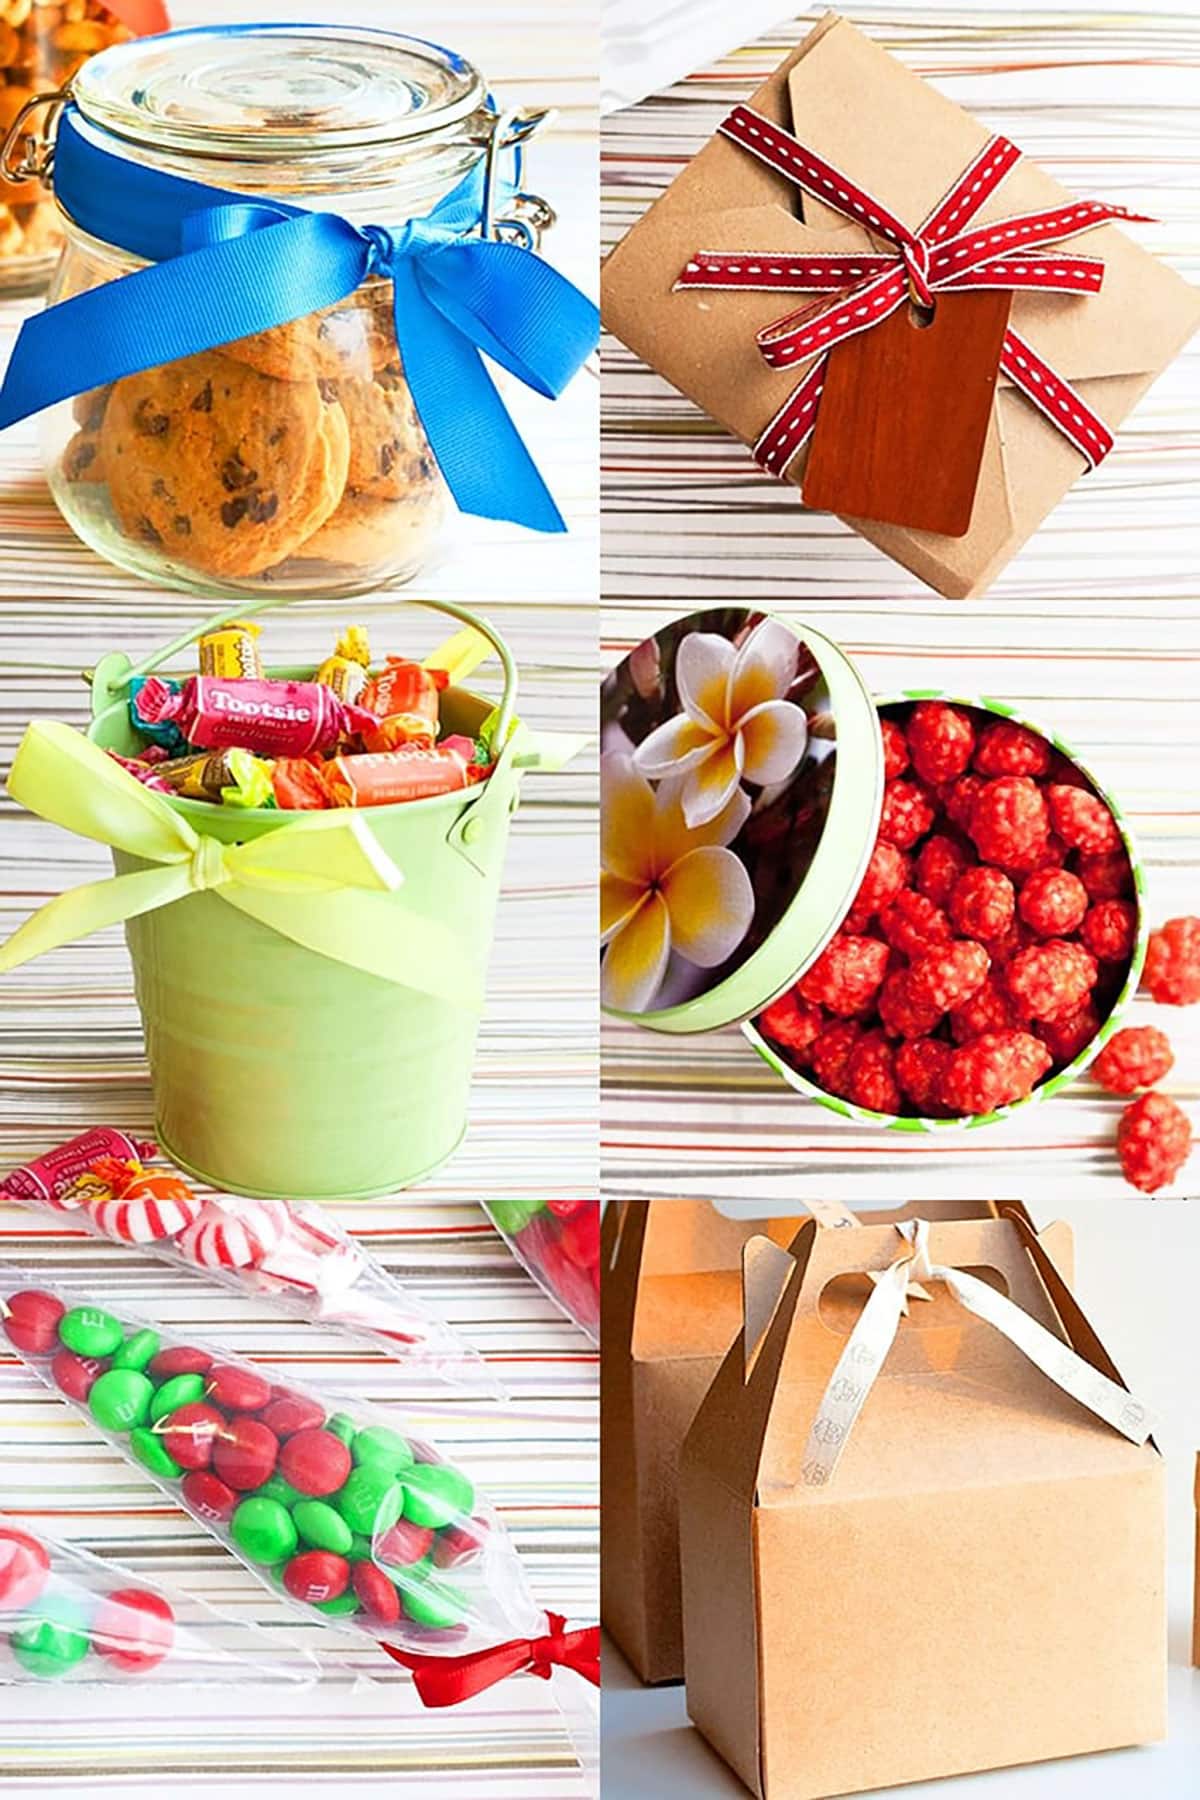 Collage Image With lots of Food and Cookie Packaging Ideas as Homemade Gifts.